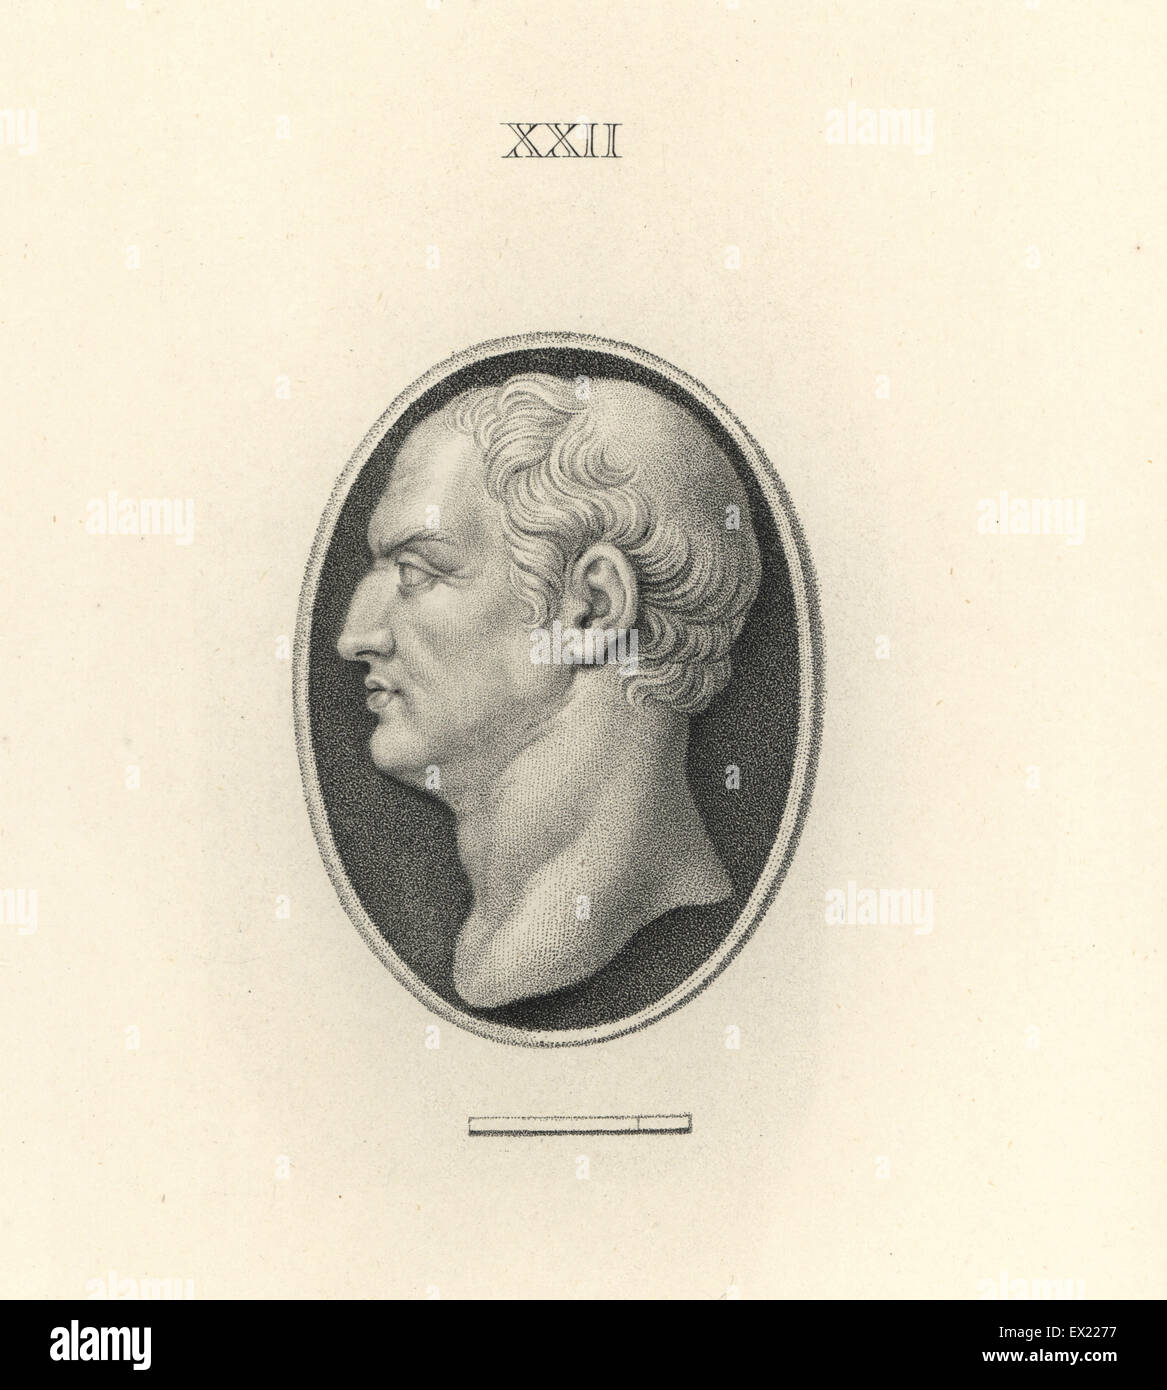 Gaius Cilnius Maecenas, political advisor to Octavian, later Roman Emperor Caesar Augustus.　Copperplate engraving by Francesco Bartolozzi from 108 Plates of Antique Gems, 1860. The gems were from the Duke of Marlborough's collection. Stock Photo